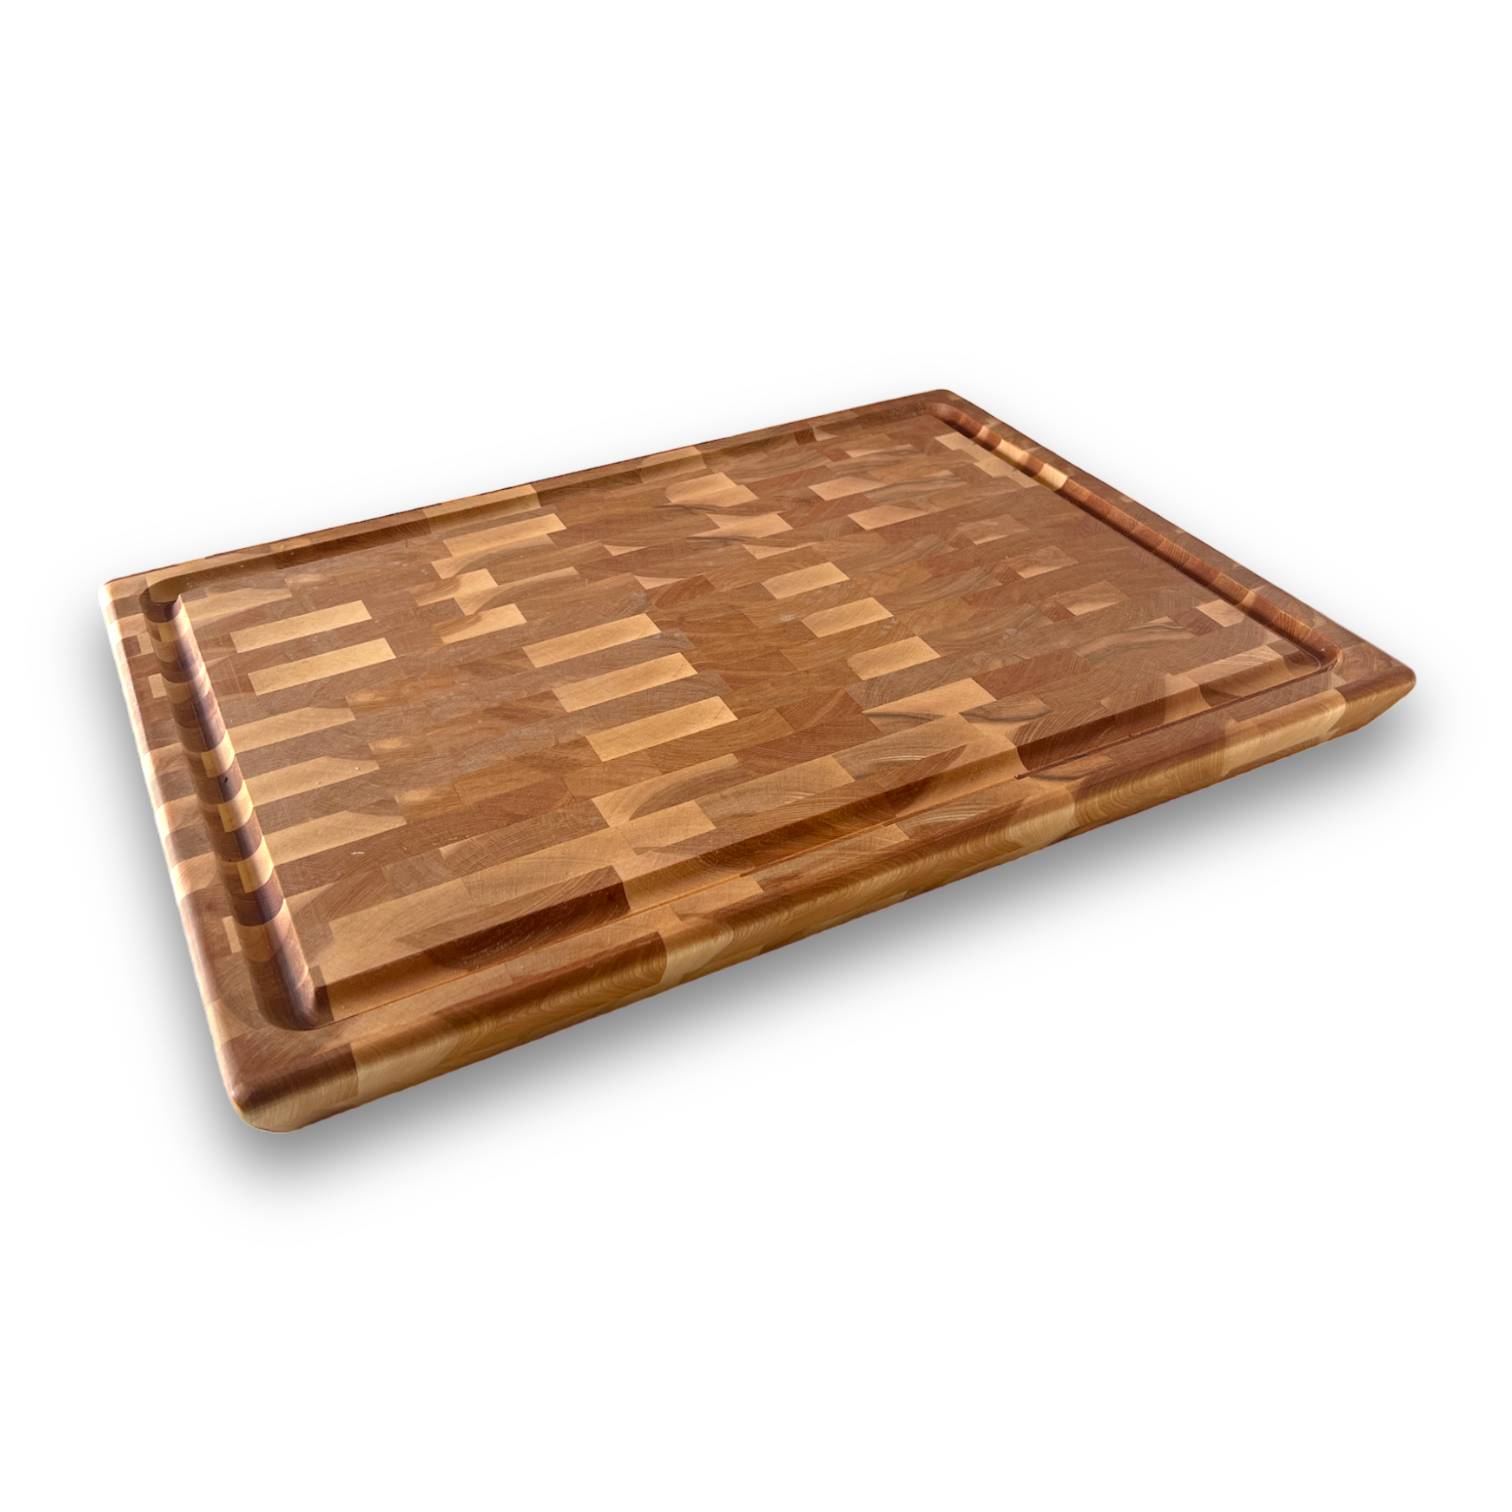 Affordable prices The John McLeod Vermont Natural Cutting Board